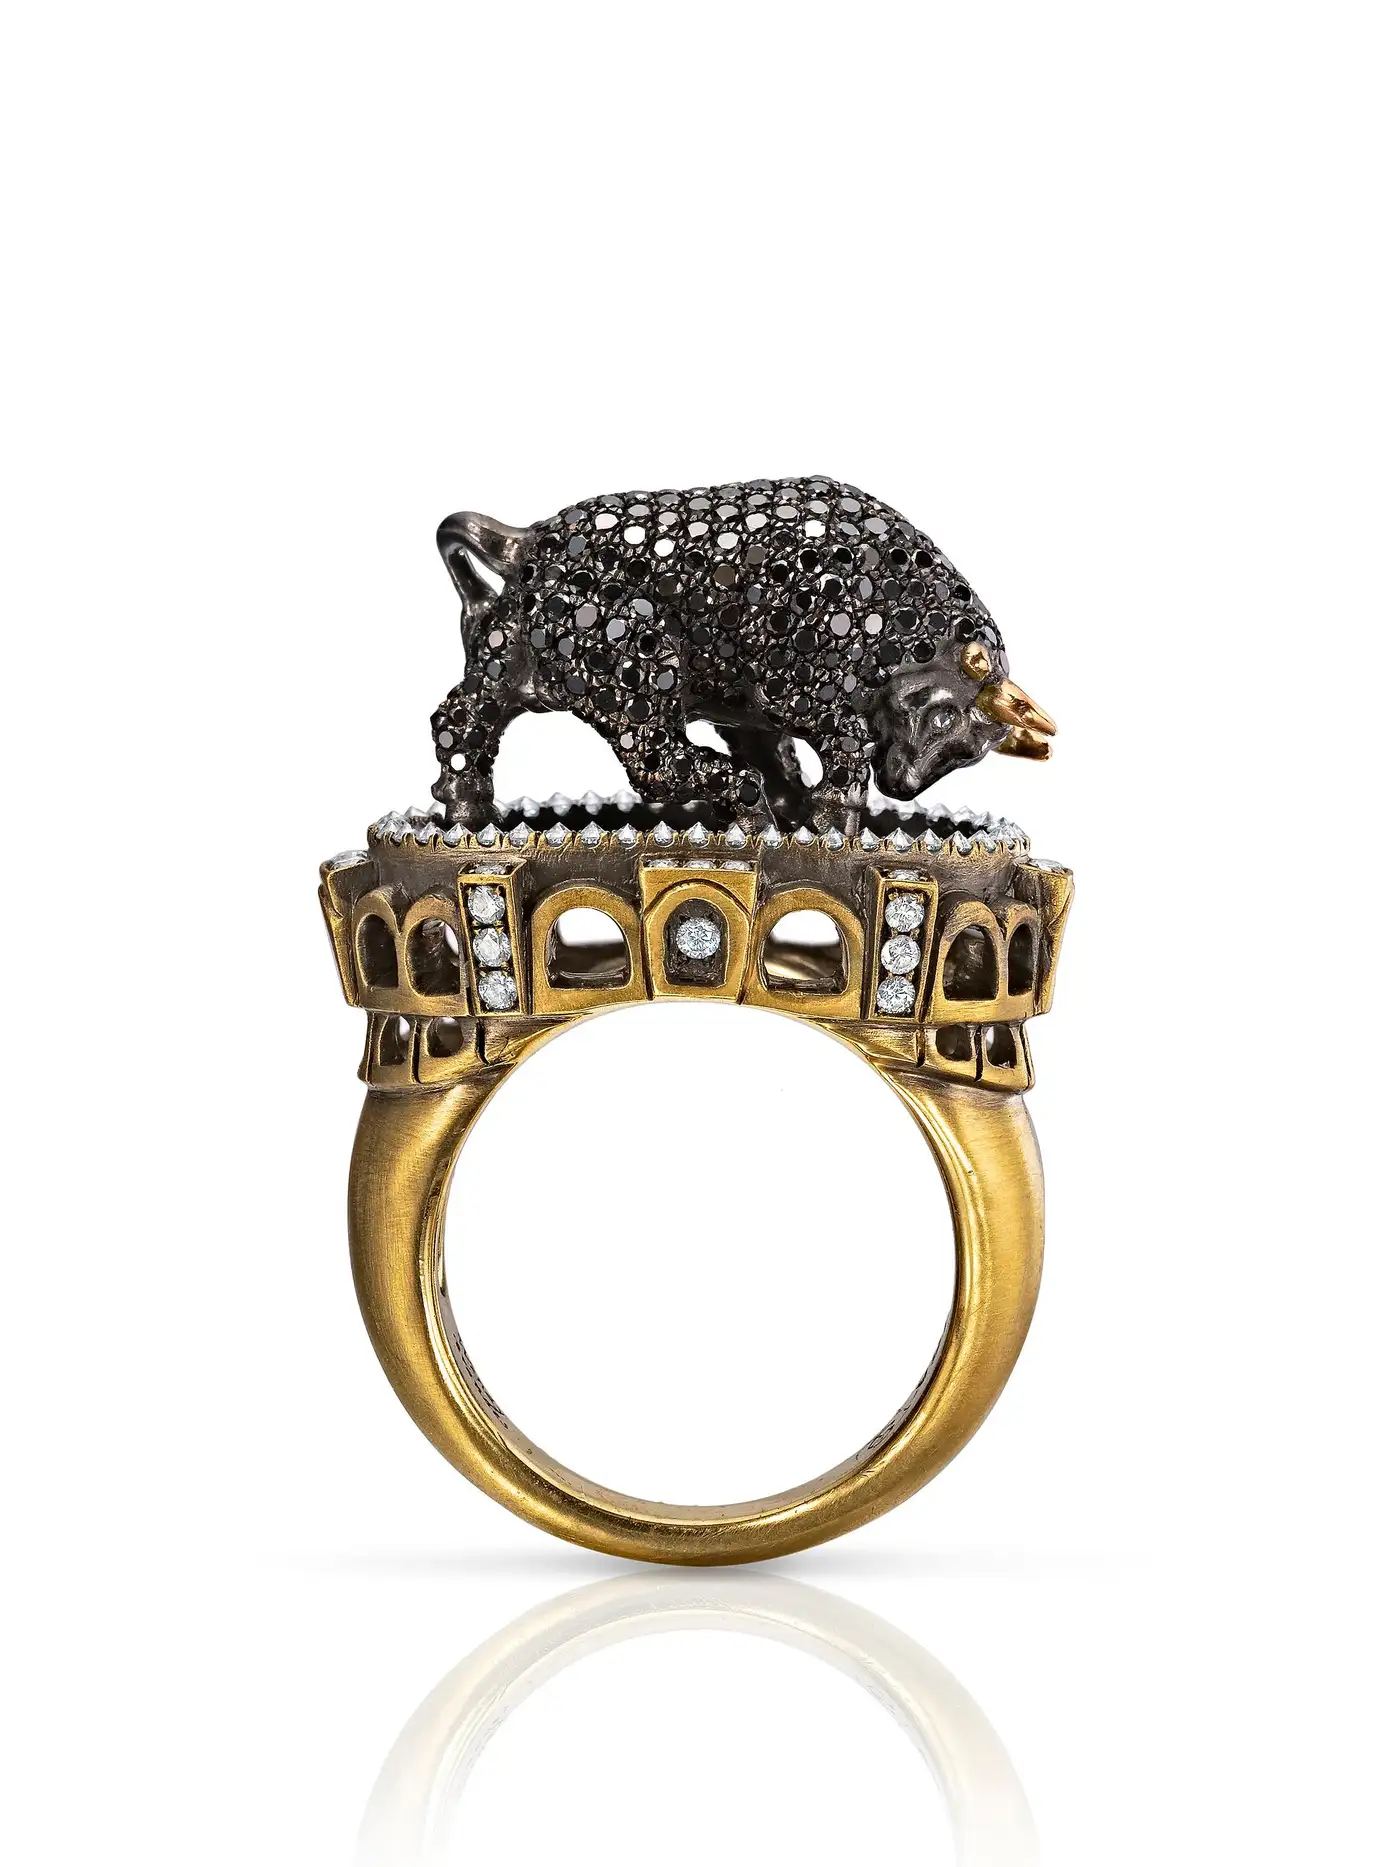 Wendy-Brandes-7-Ring-Diamond-and-Coloured-Gemstone-Animal-Design-Collection-12.webp